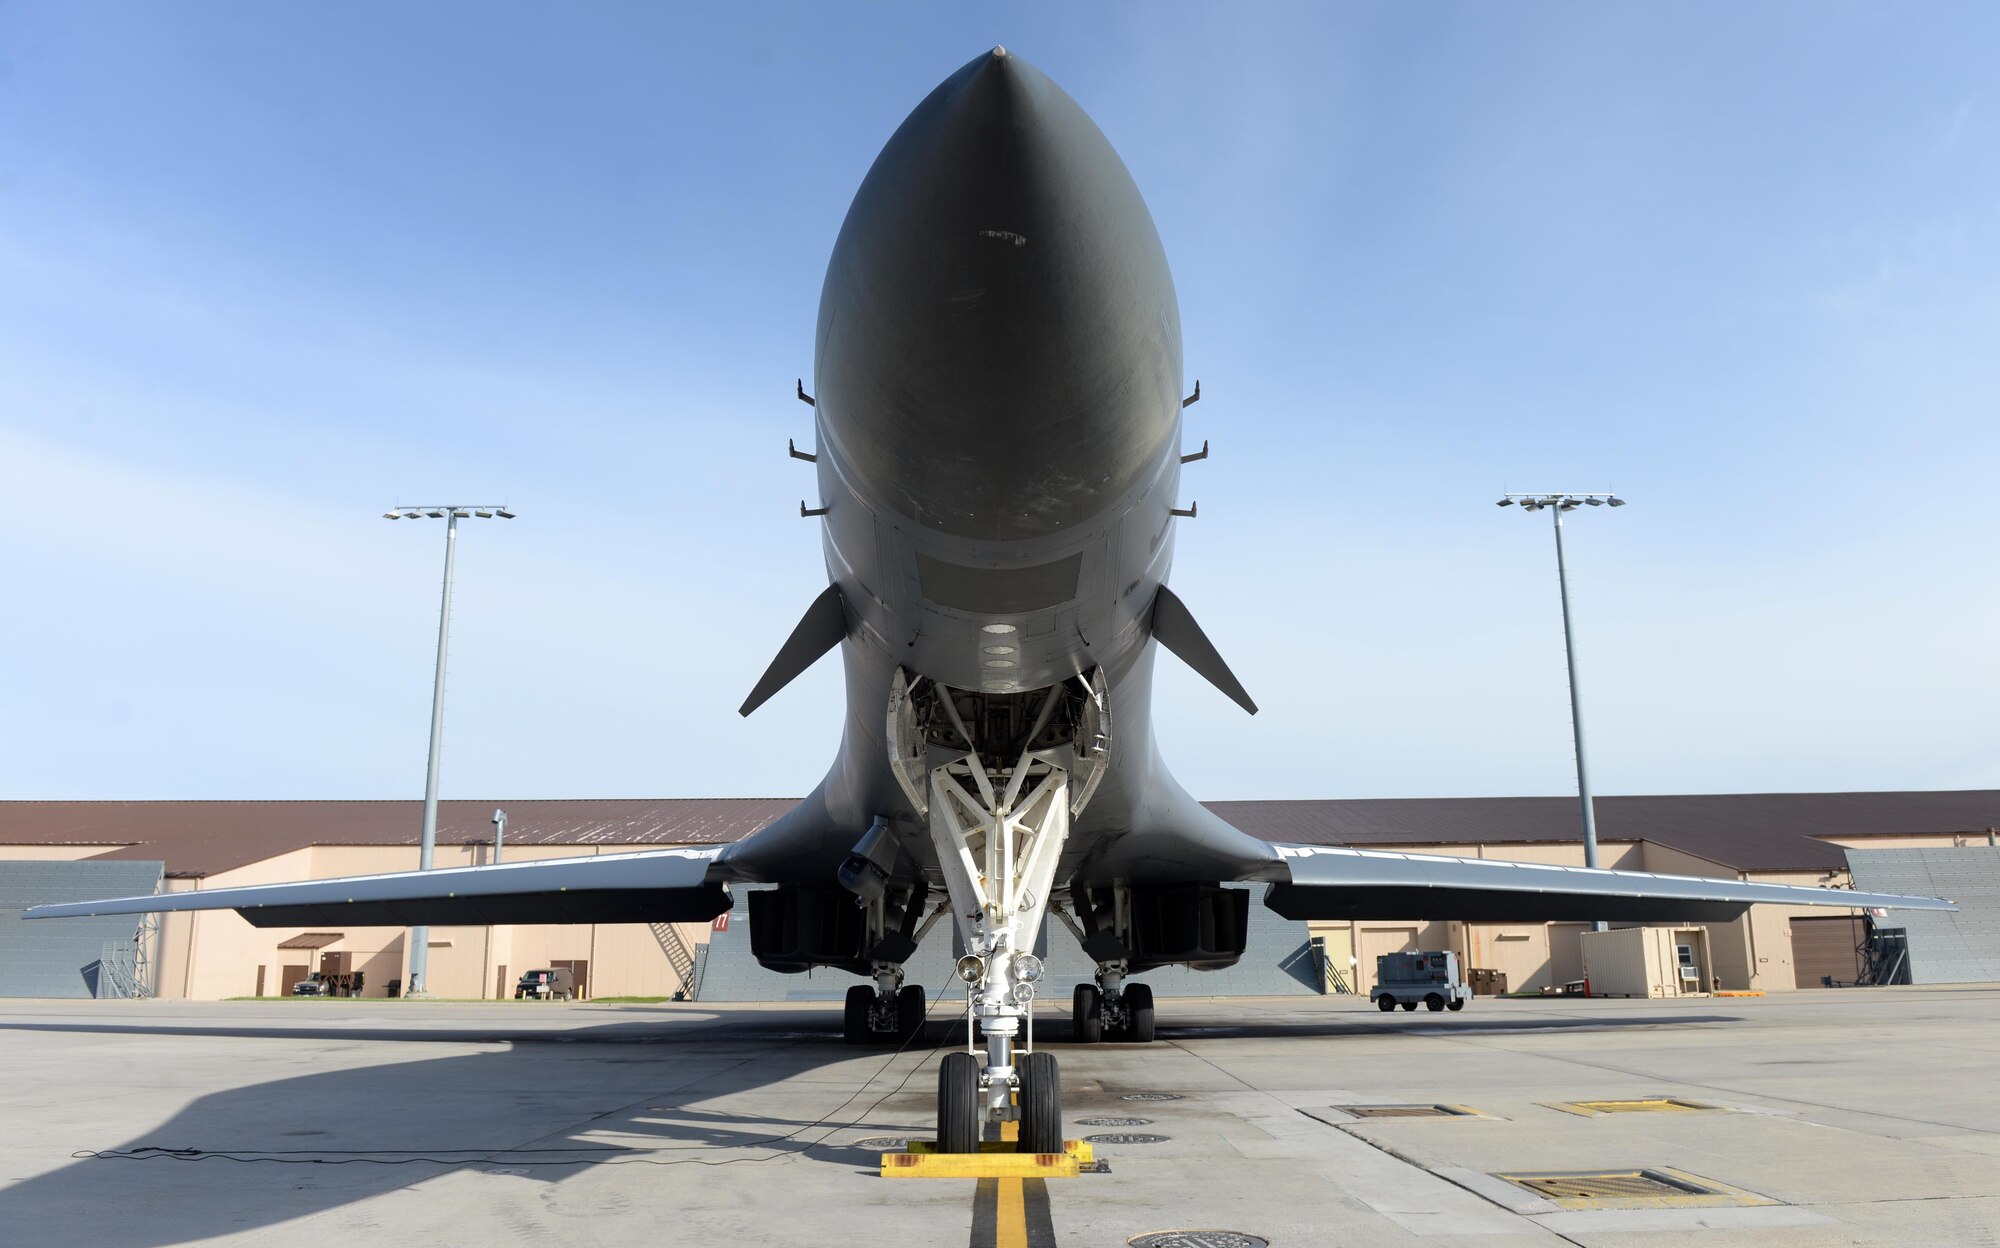 A B-1B Lancer sits on the flightline prior to a non-stop deployment from Ellsworth Air Force Base, S.D., May 4, 2020. These flights are not in direct response to specific actions taken by any nation. Alongside other military operations and exercises in the region, Bomber Task Force missions enable crews to remain ready to respond with lethal capability to any potential crisis or challenge across the globe. (U.S. Air Force photo by Airman Quentin Marx)